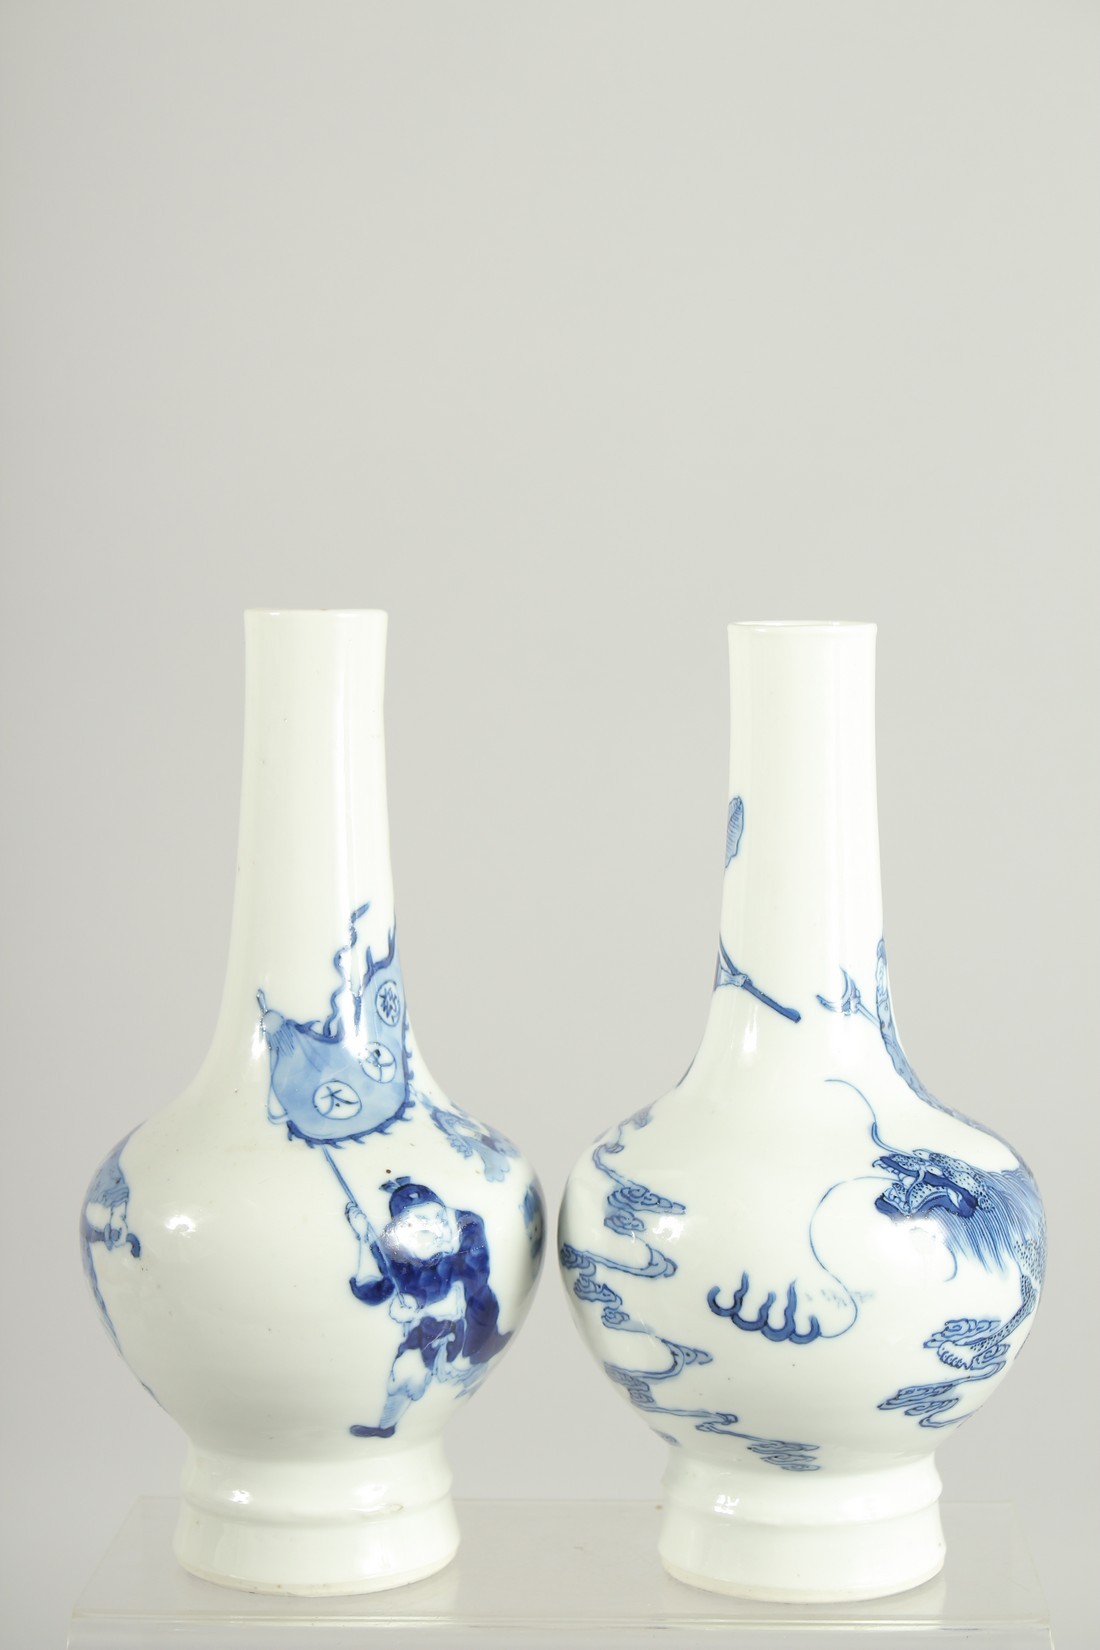 A FINE PAIR OF CHINESE BLUE AND WHITE PORCELAIN BOTTLE VASES, one painted with a warrior riding a - Image 4 of 8